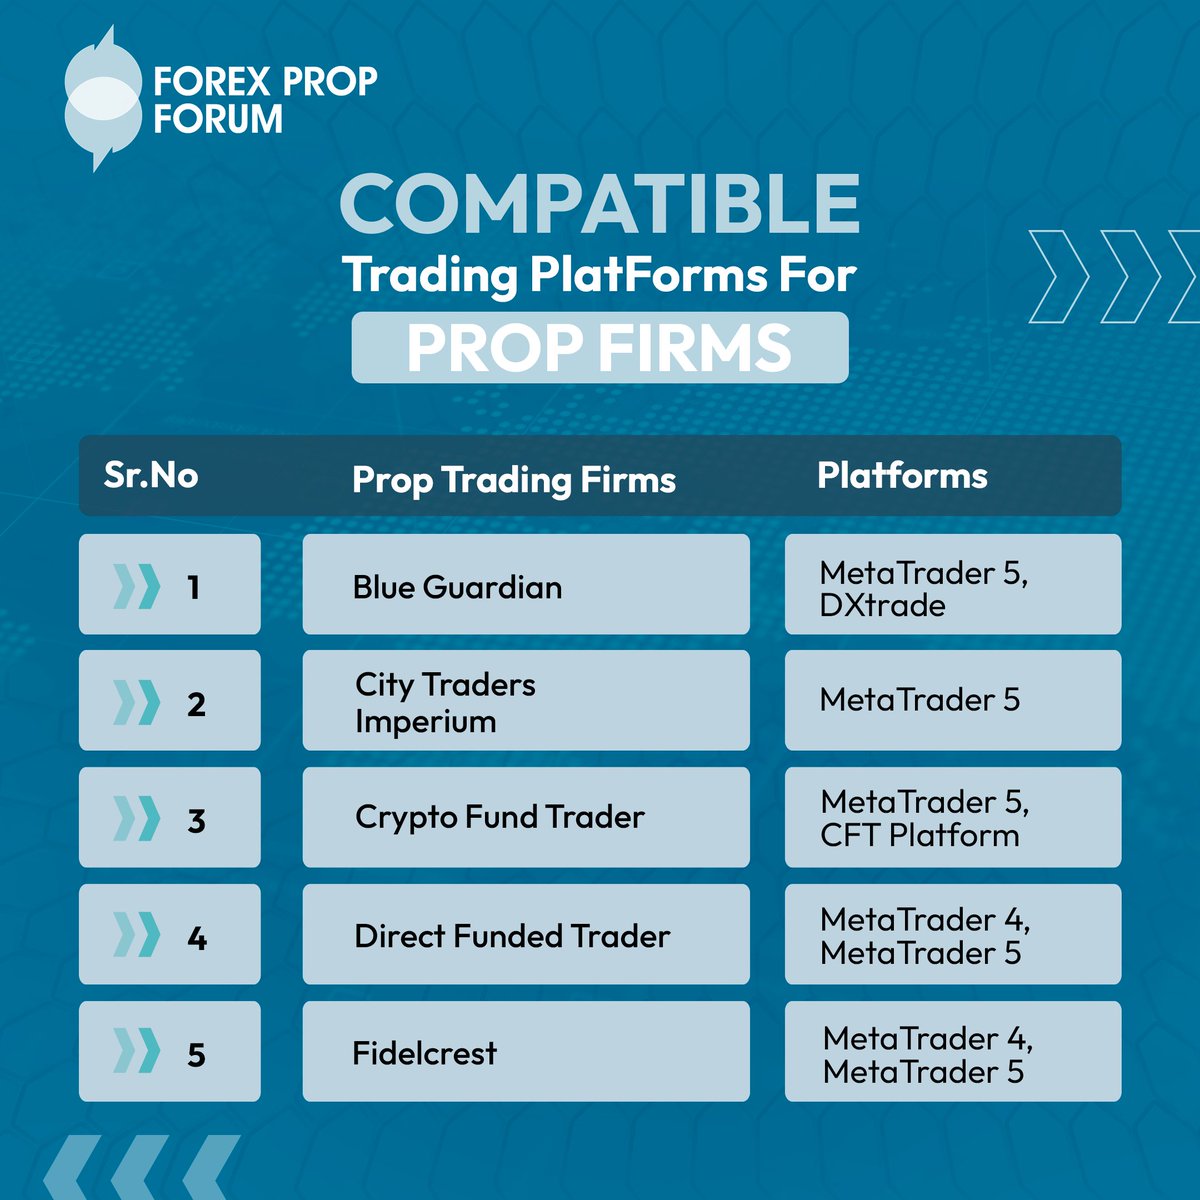 Continuing our series on updated platforms utilized by Prop Firms. Check out our updated list of the best trading platforms for prop firms! ⤵️
#TradingPlatforms #PropTrading #ForexTrading #PropFirms